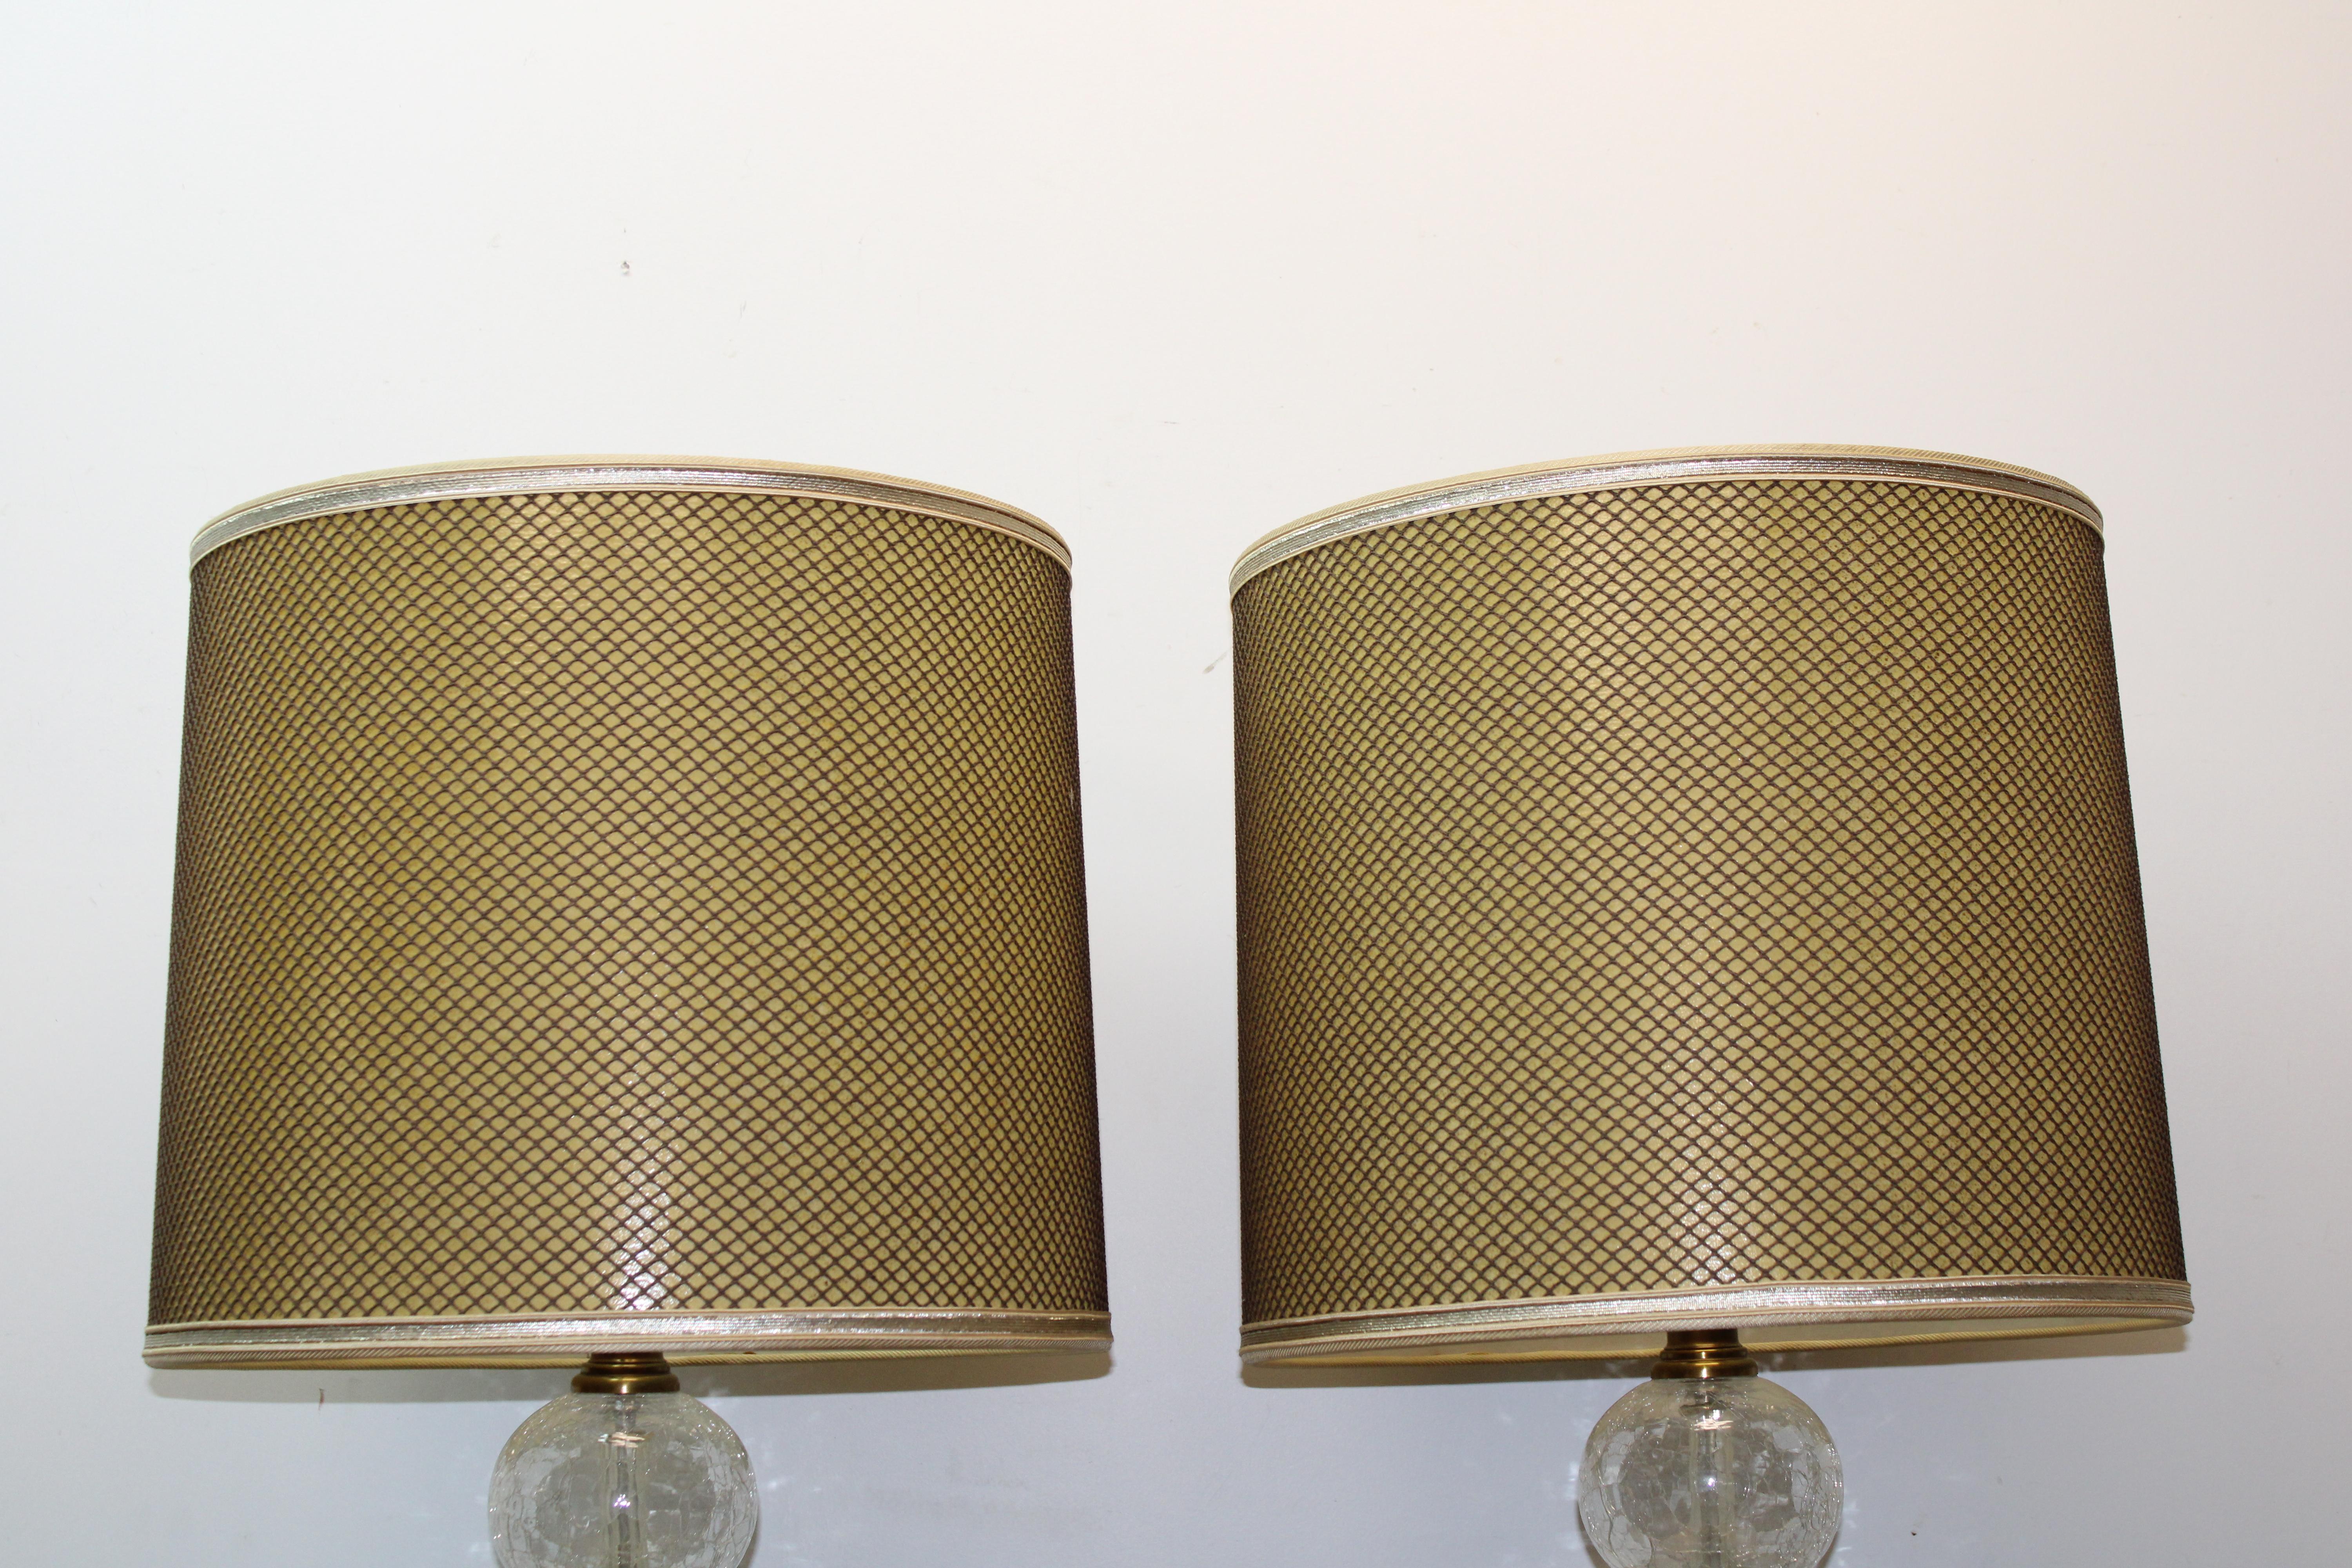 C. 20th century

Pair of mid century American clear crackled glass lamps By Paul Hanson

Lamps consist of 4 stacked clear crackled glass spheres w/ brass dividers on a circular base.